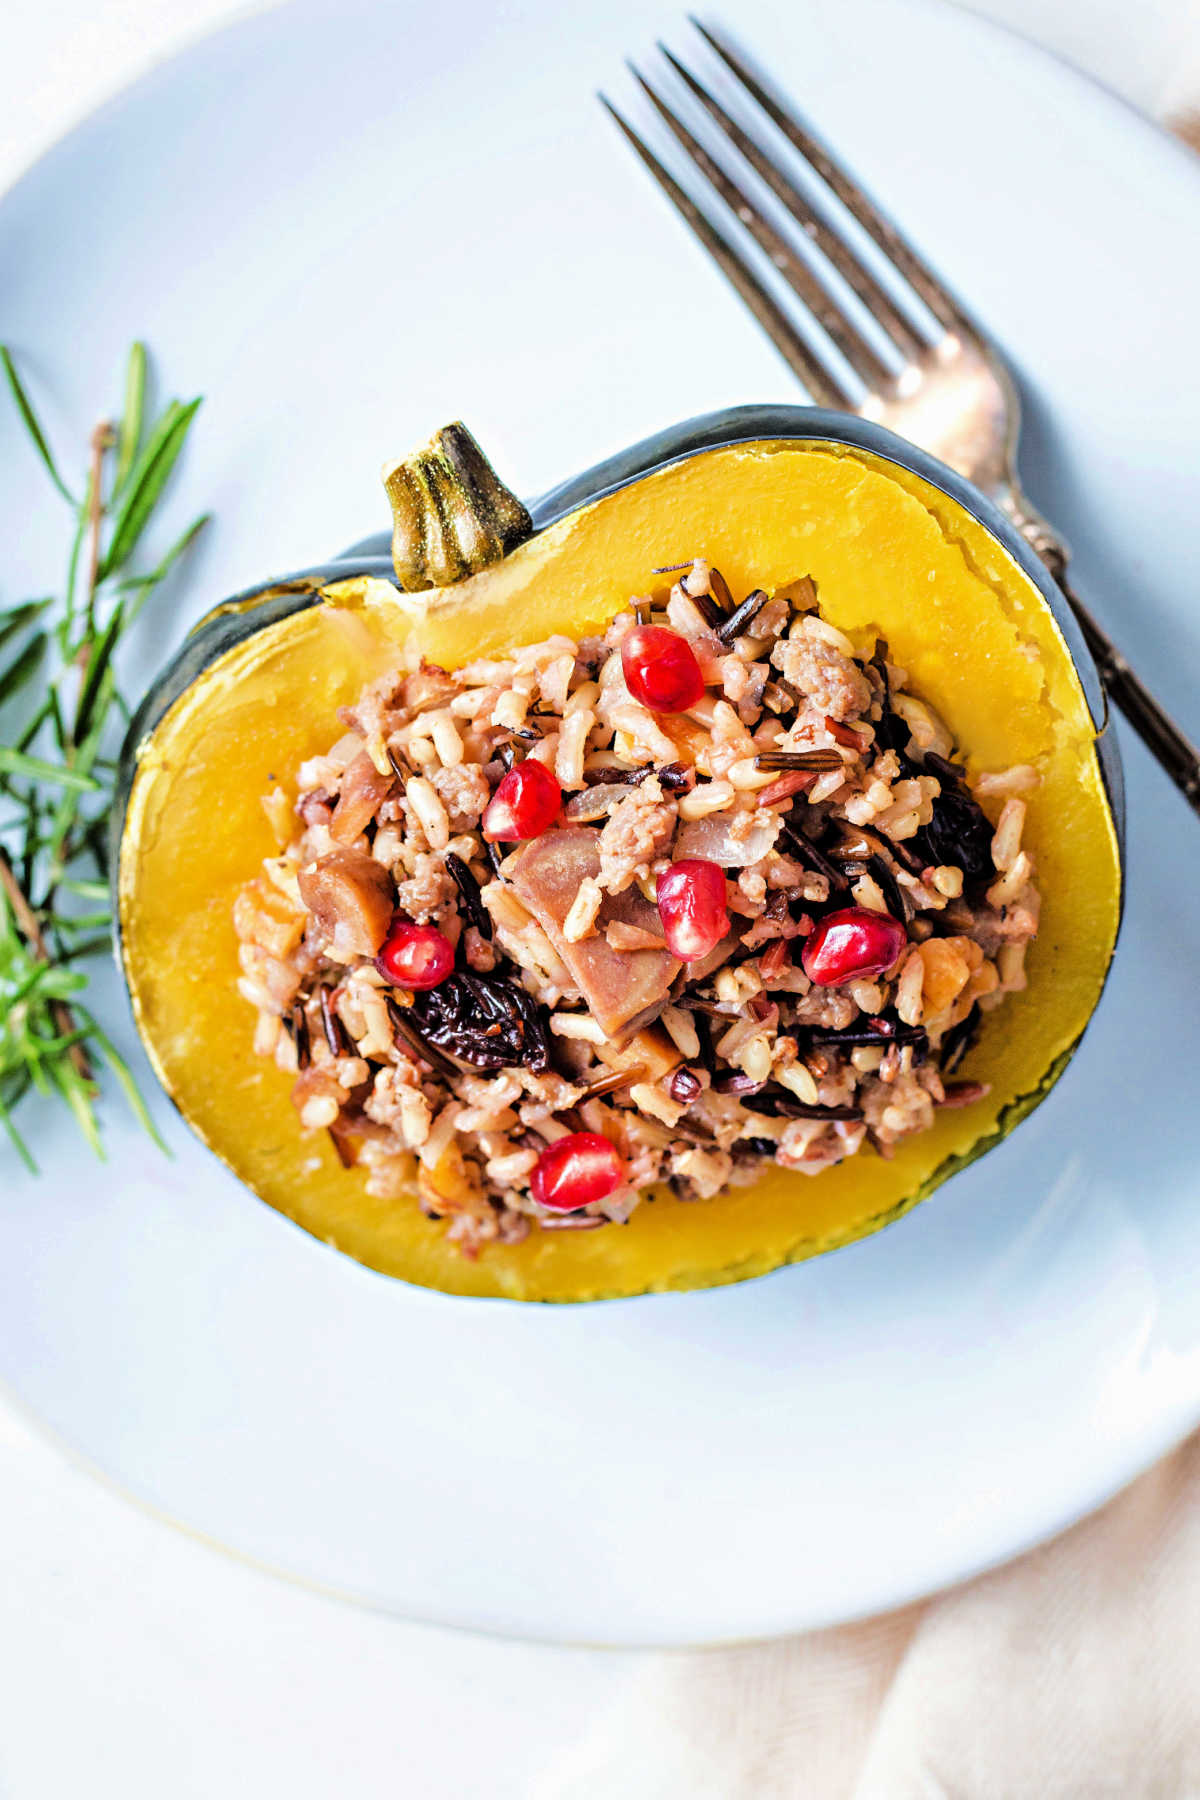 instant pot acorn squash stuffed with wild rice and sausage on a white plate with a sprig or rosemary and a fork.